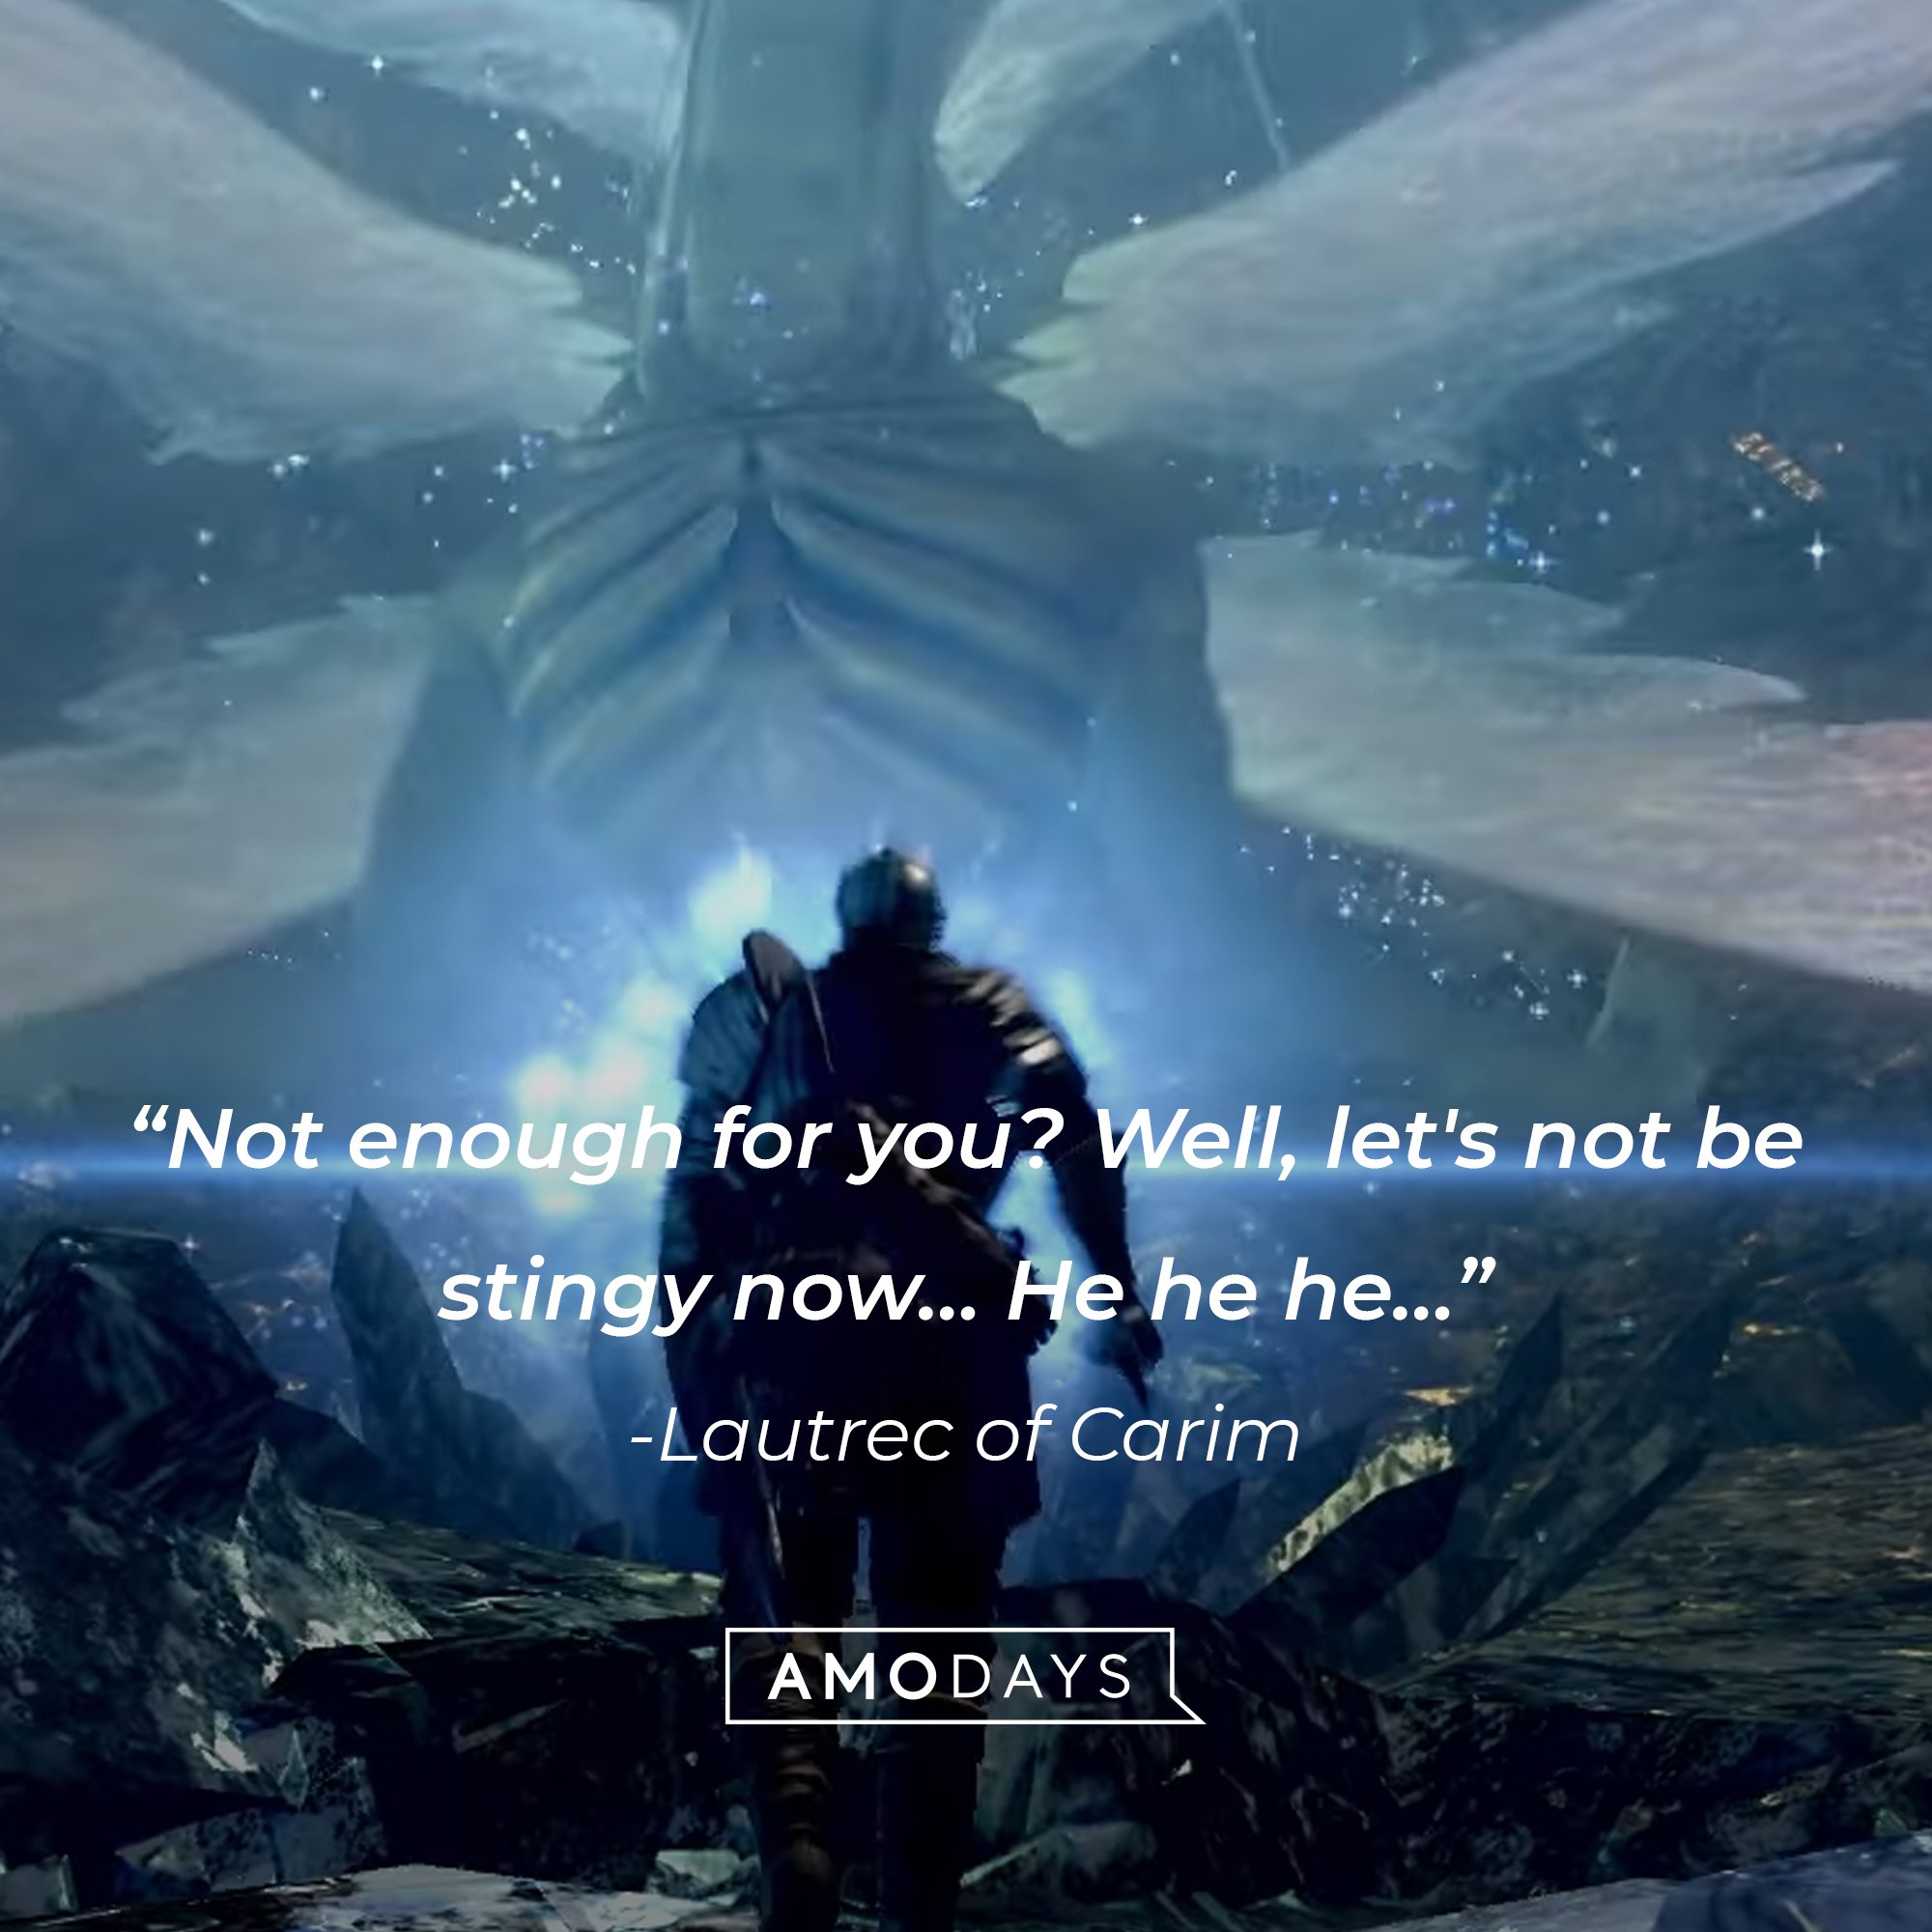 Lautrec of Carim’s quote: "Not enough for you? Well, let's not be stingy now… He he he…” | Image: AmoDays